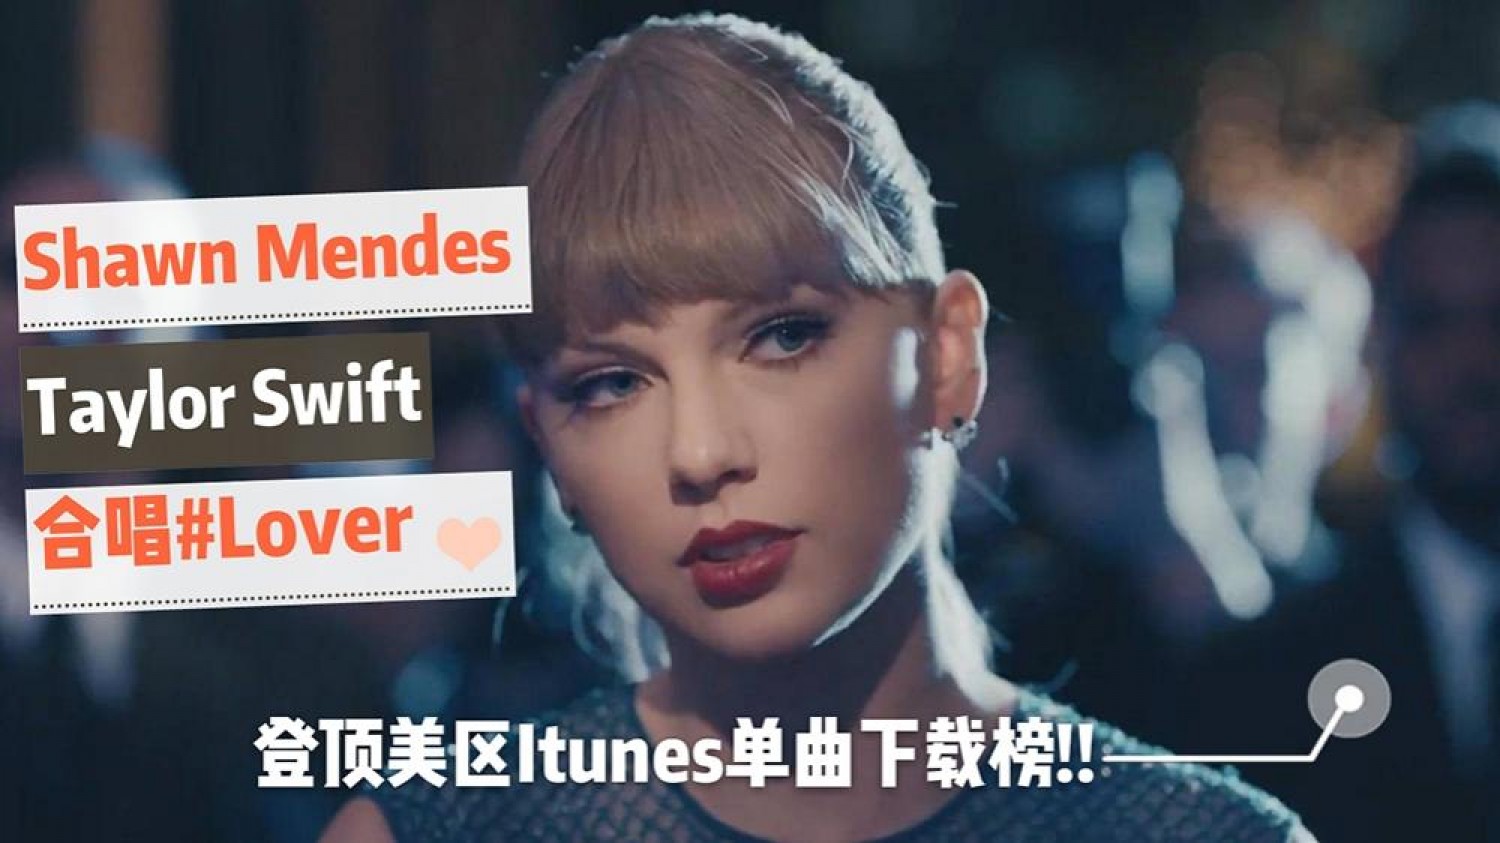 Taylor Swift【Lover】feat. Shawn Mendes (Nov 2019) LiveBa! - Music, Livehouse, Live Band, Gig in Malaysia 